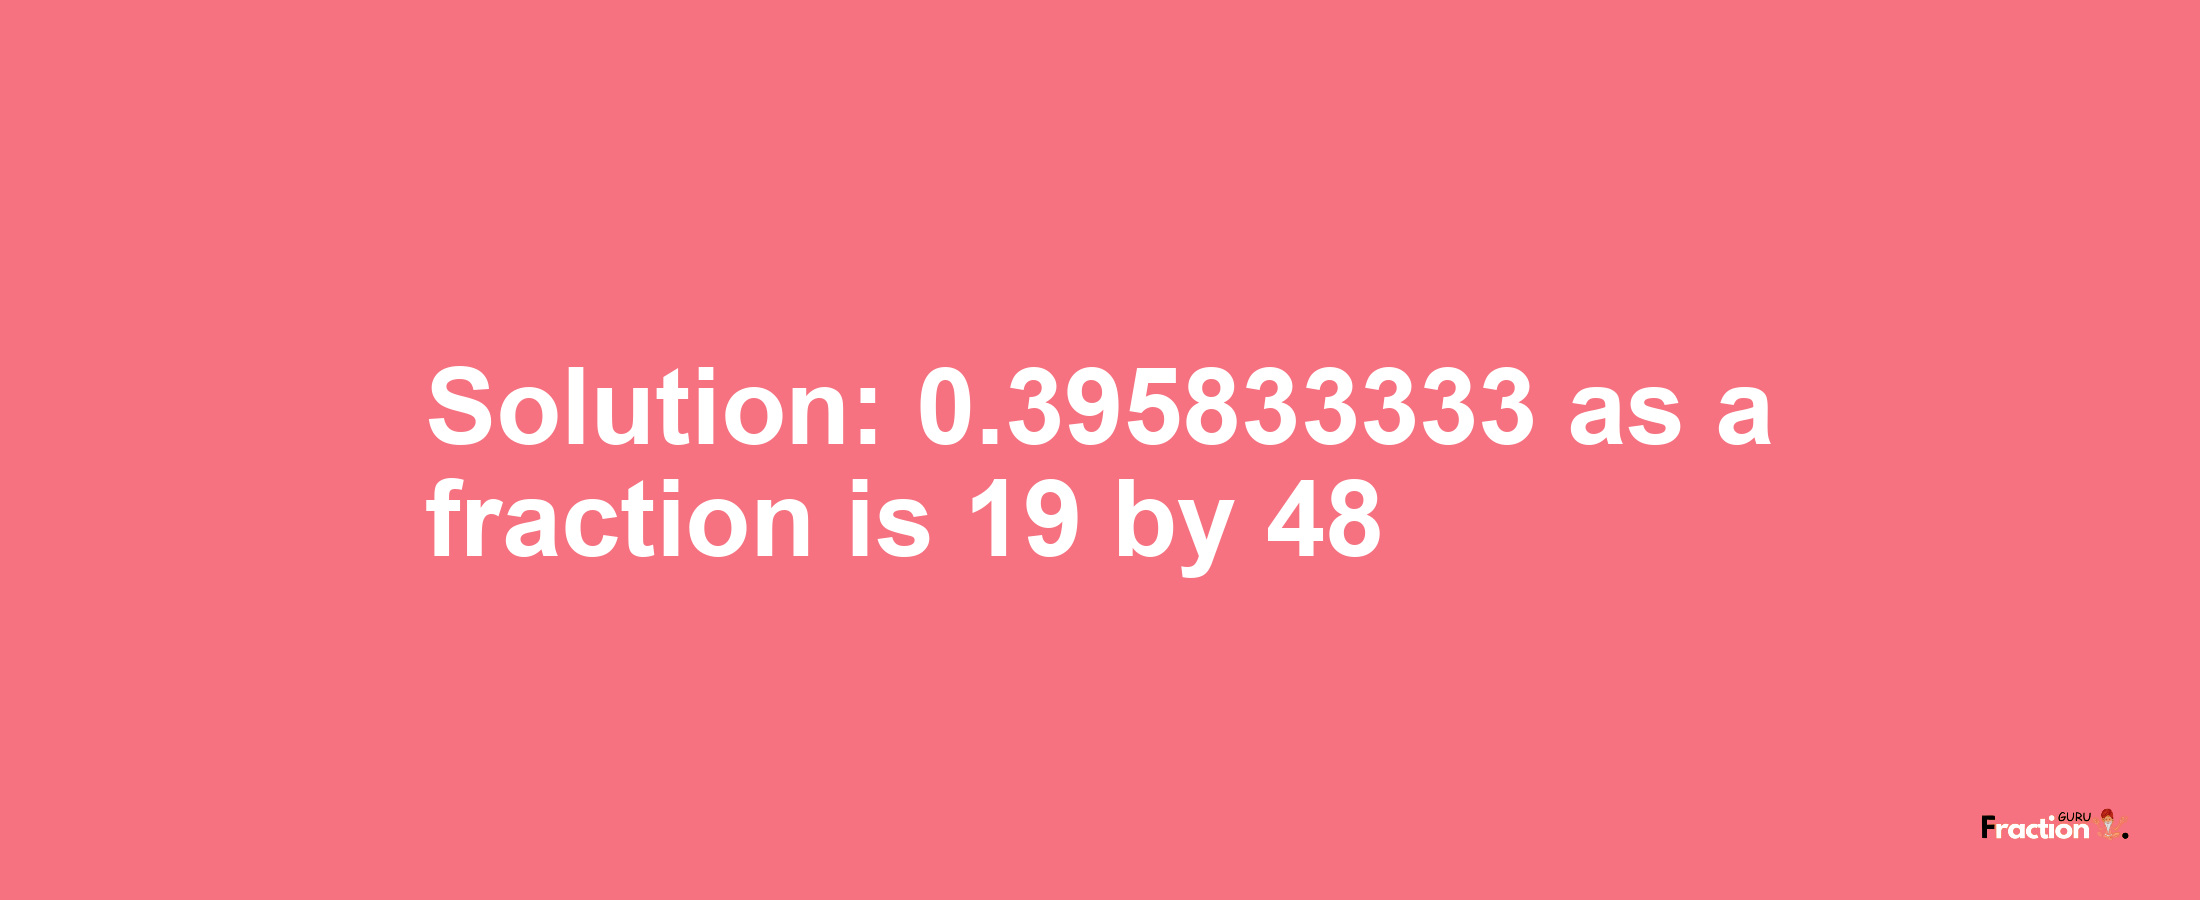 Solution:0.395833333 as a fraction is 19/48